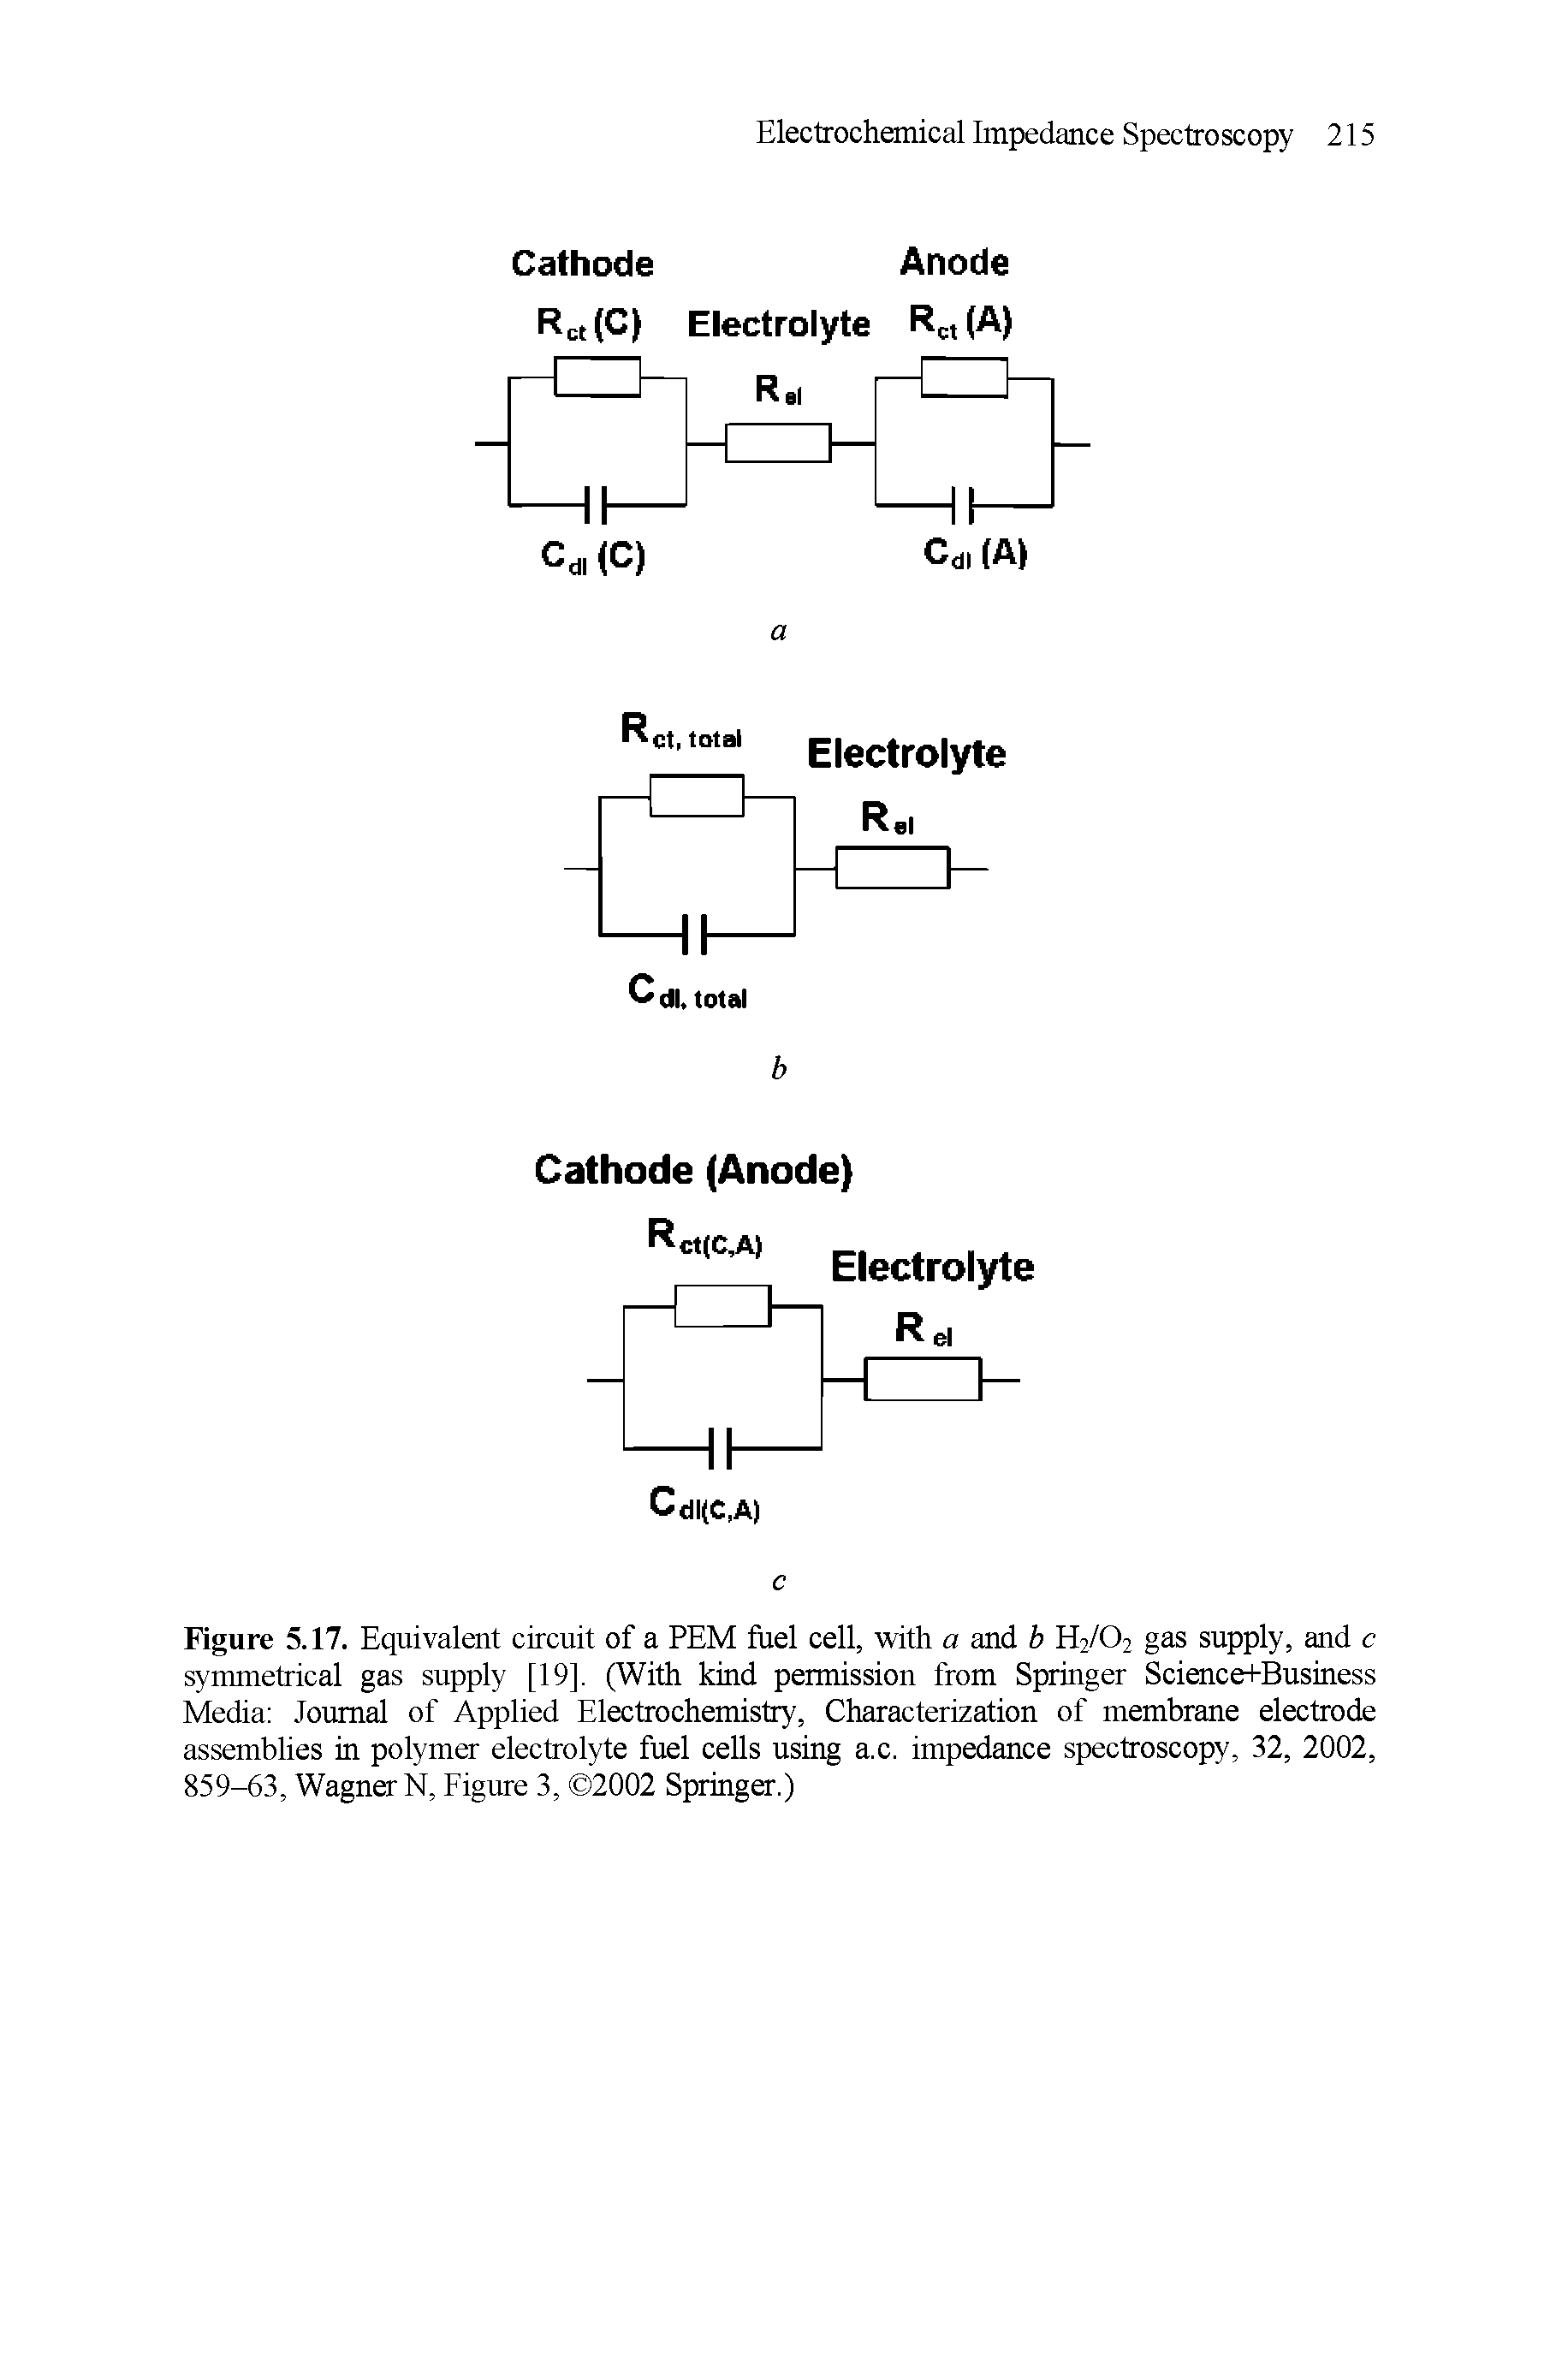 Figure 5.17. Equivalent circuit of a PEM fuel cell, with a and b H2/02 gas supply, and c symmetrical gas supply [19]. (With kind permission from Springer Science+Business Media Journal of Applied Electrochemistry, Characterization of membrane electrode assemblies in polymer electrolyte fuel cells using a.c. impedance spectroscopy, 32, 2002, 859-63, Wagner N, Figure 3, 2002 Springer.)...